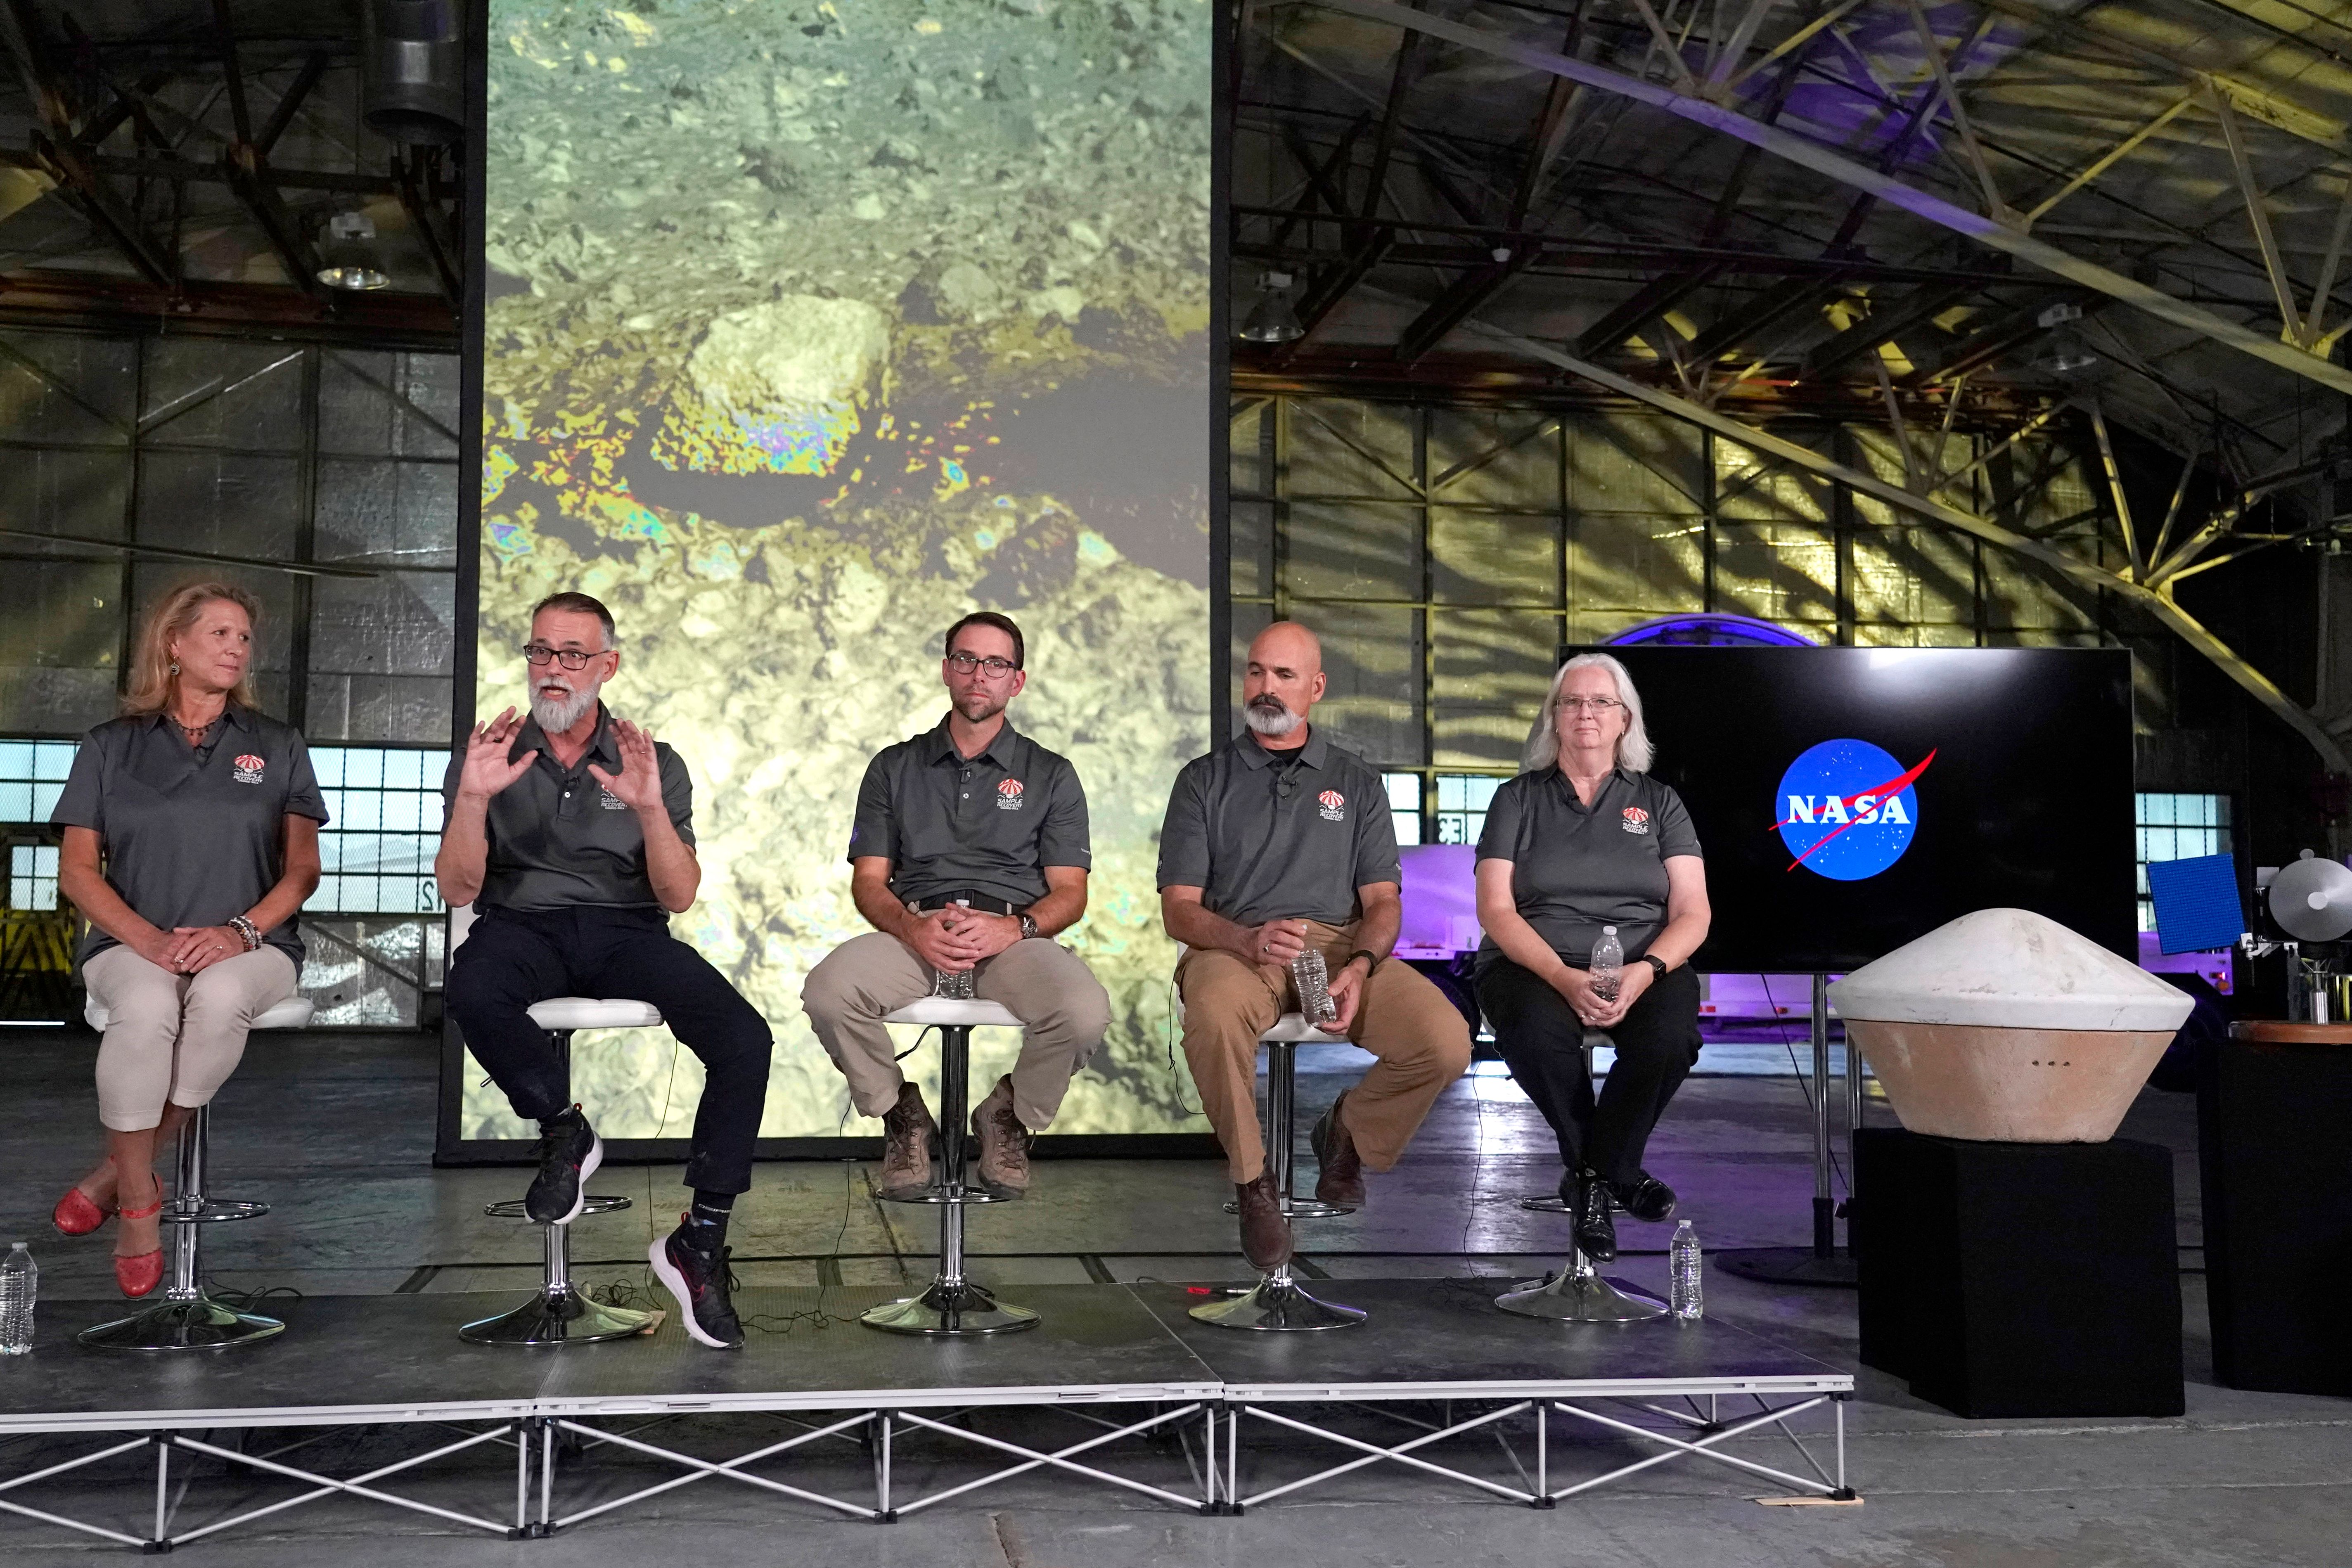 five people in matching grey shirts sit on a podium in an aircraft hangar speaking to a crowd